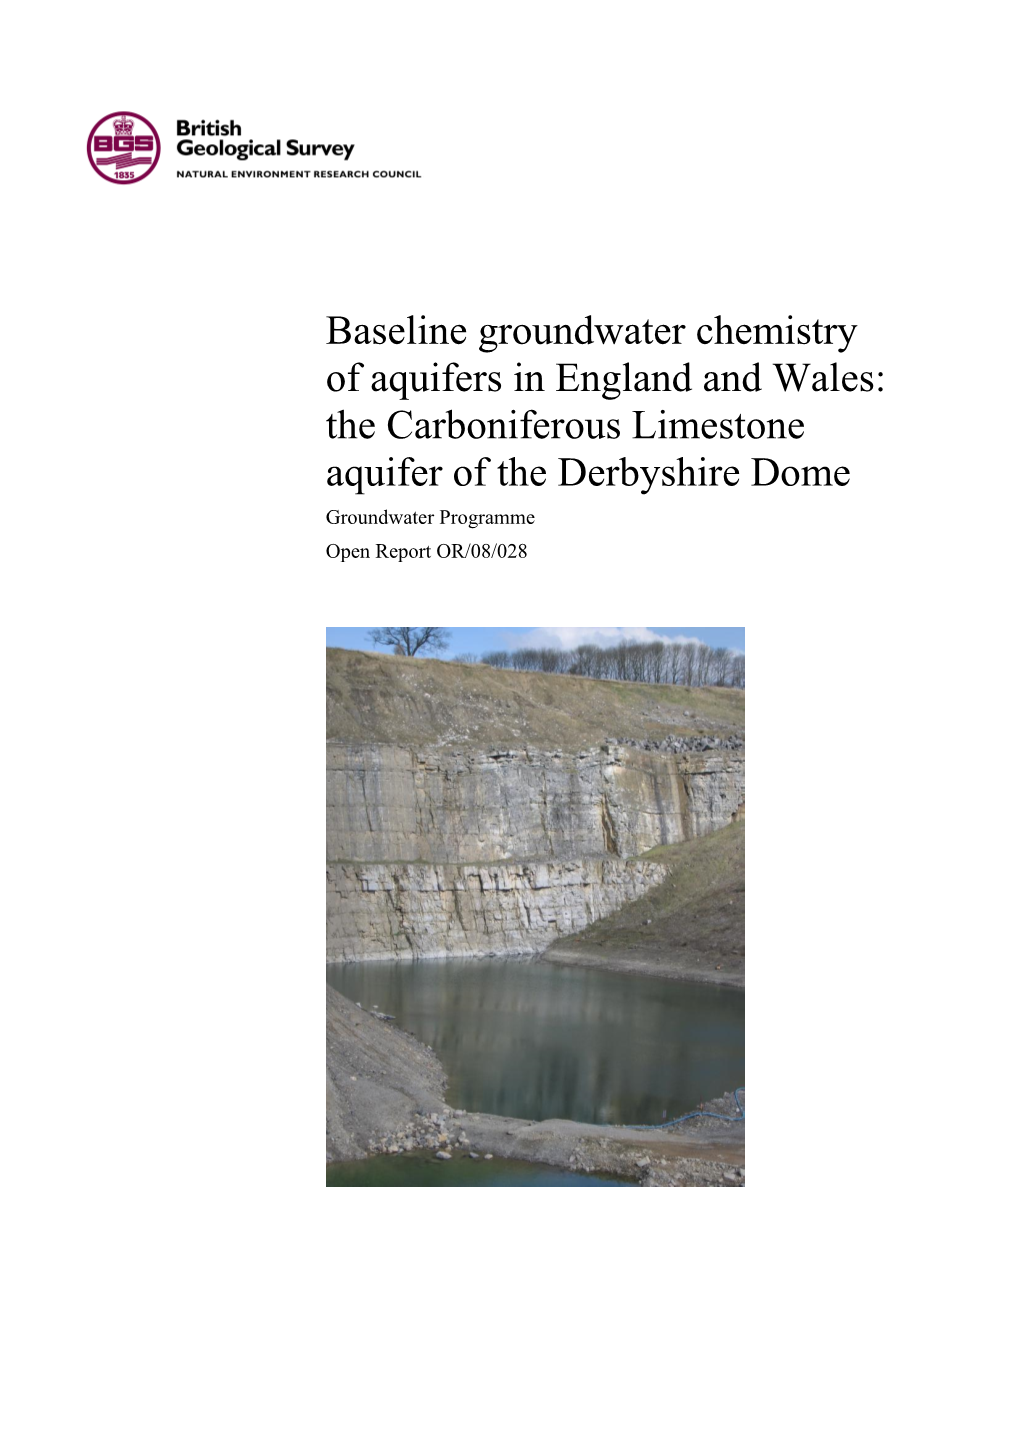 Baseline Groundwater Chemistry of Aquifers in England and Wales: The